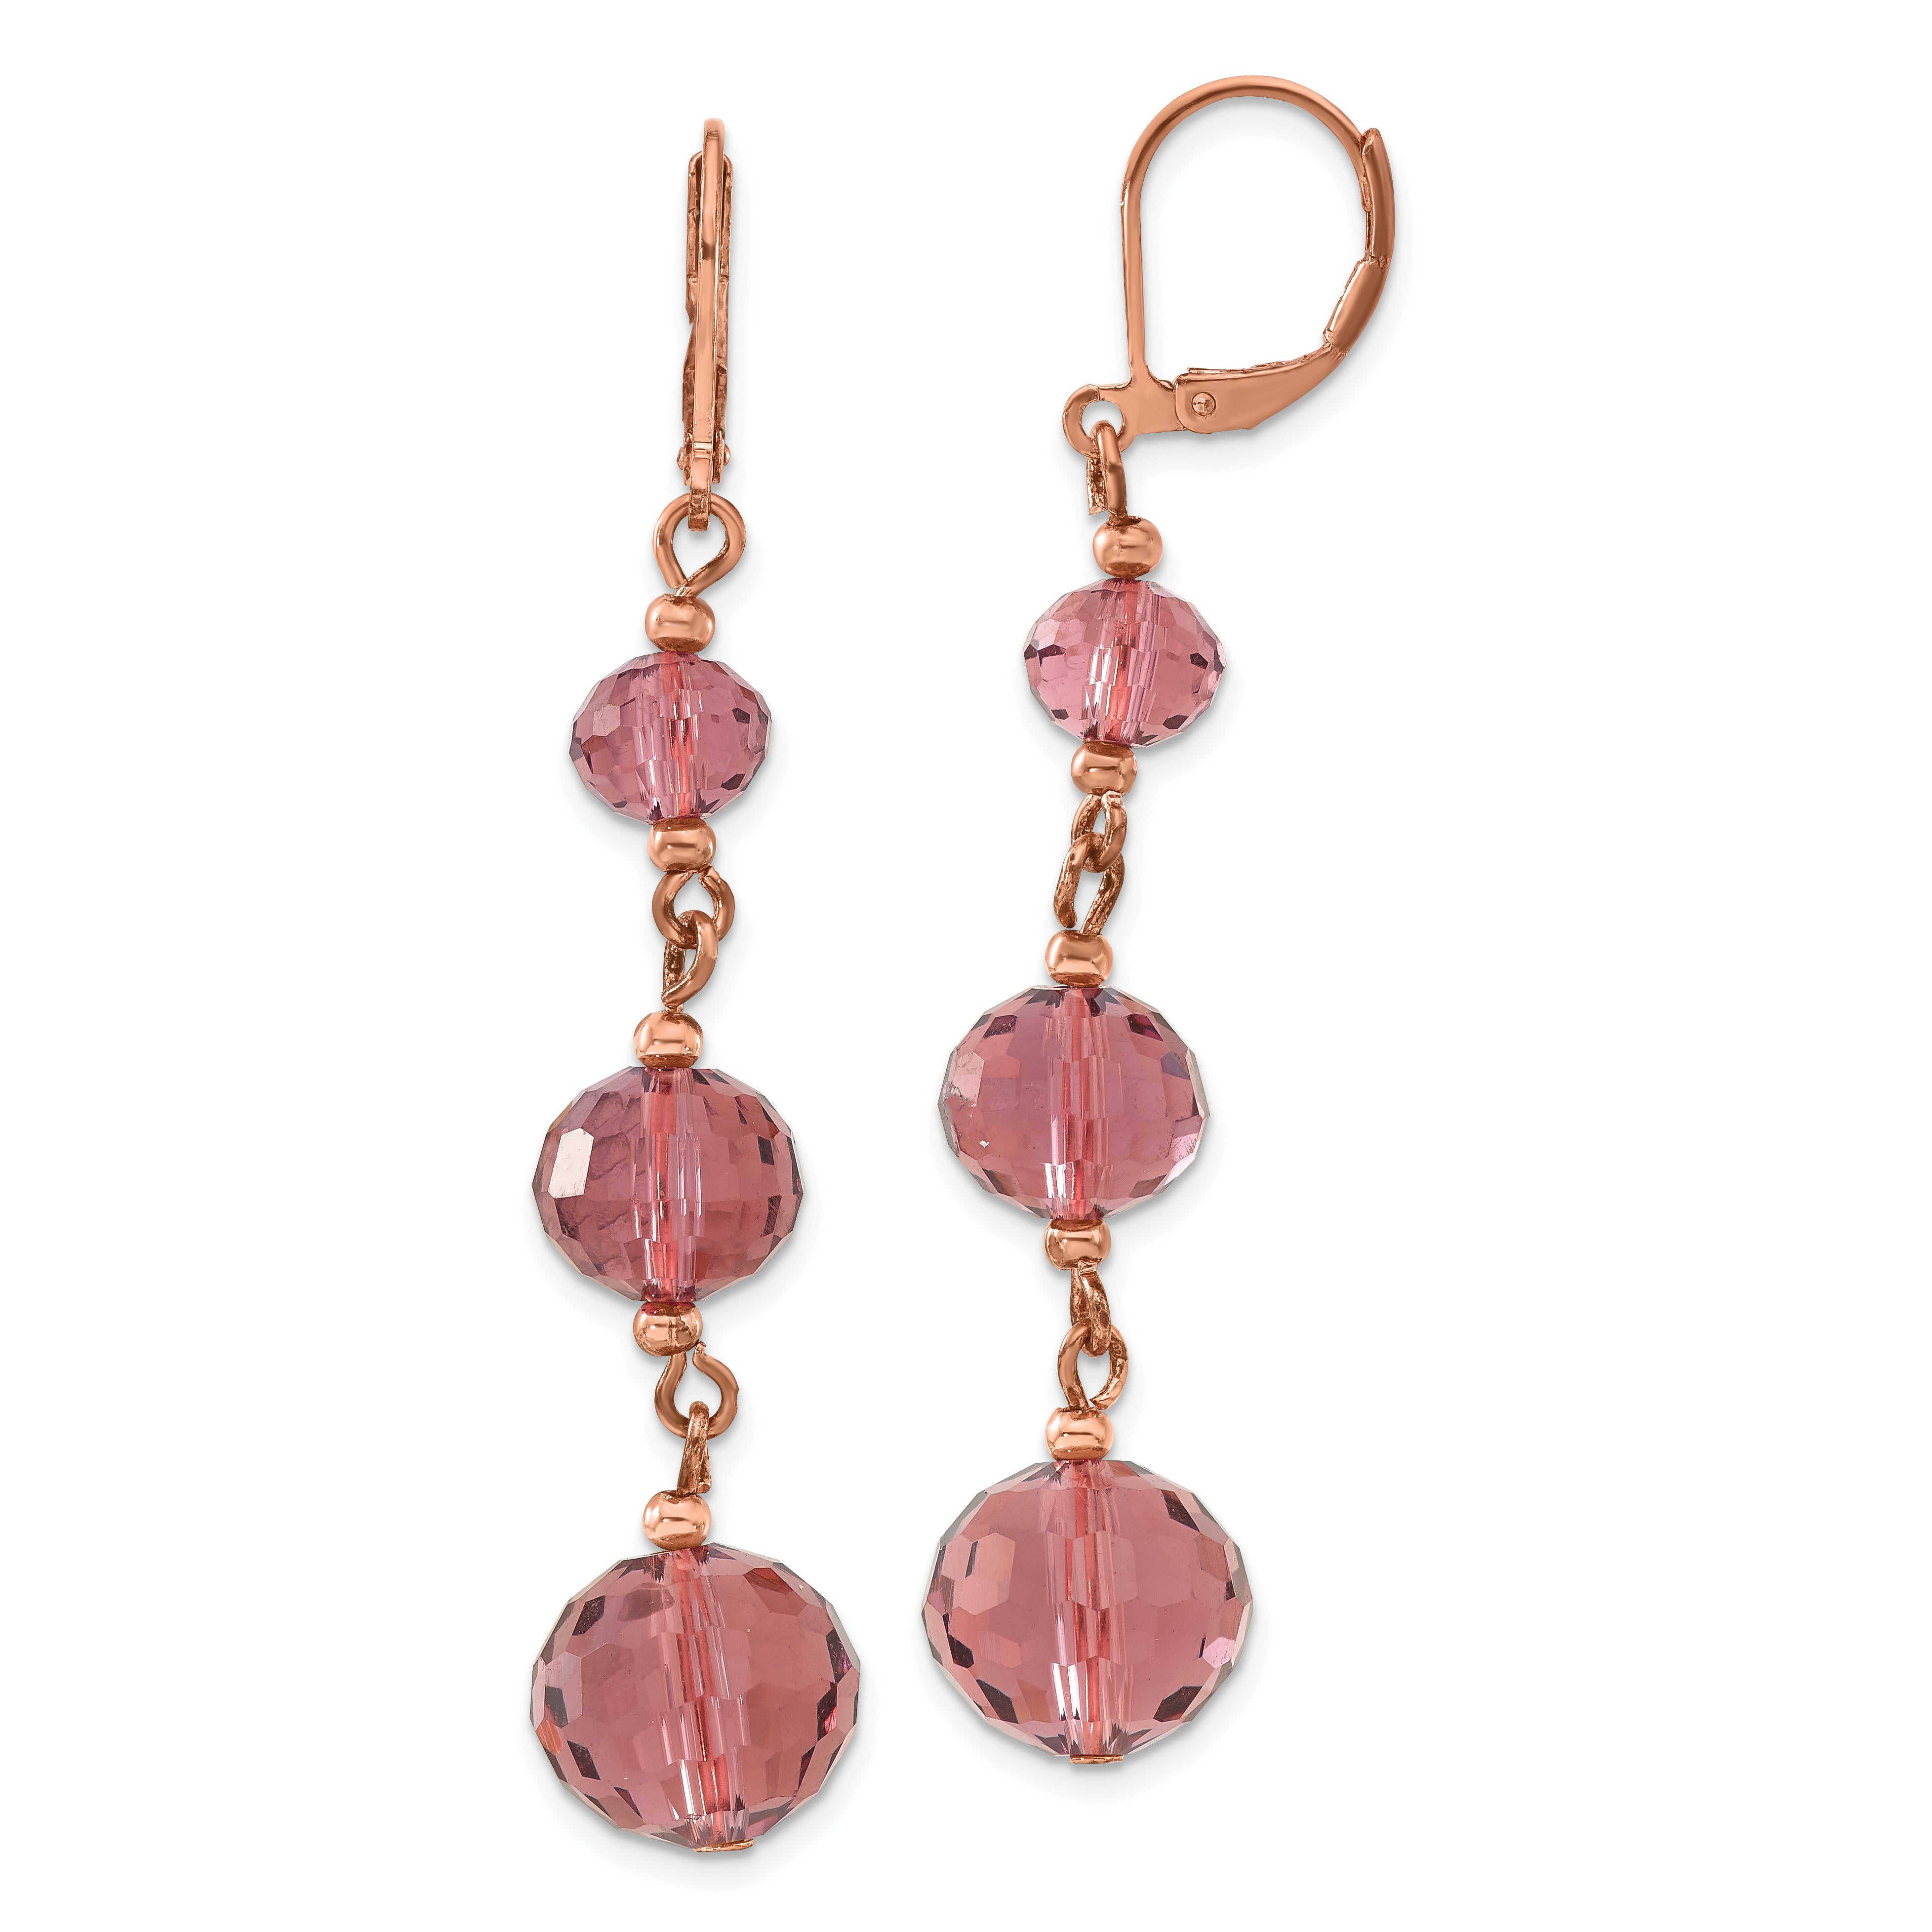 1928 Jewelry Rose-tone Graduated Faceted Purple Glass Beads Dangle Leverback Earrings